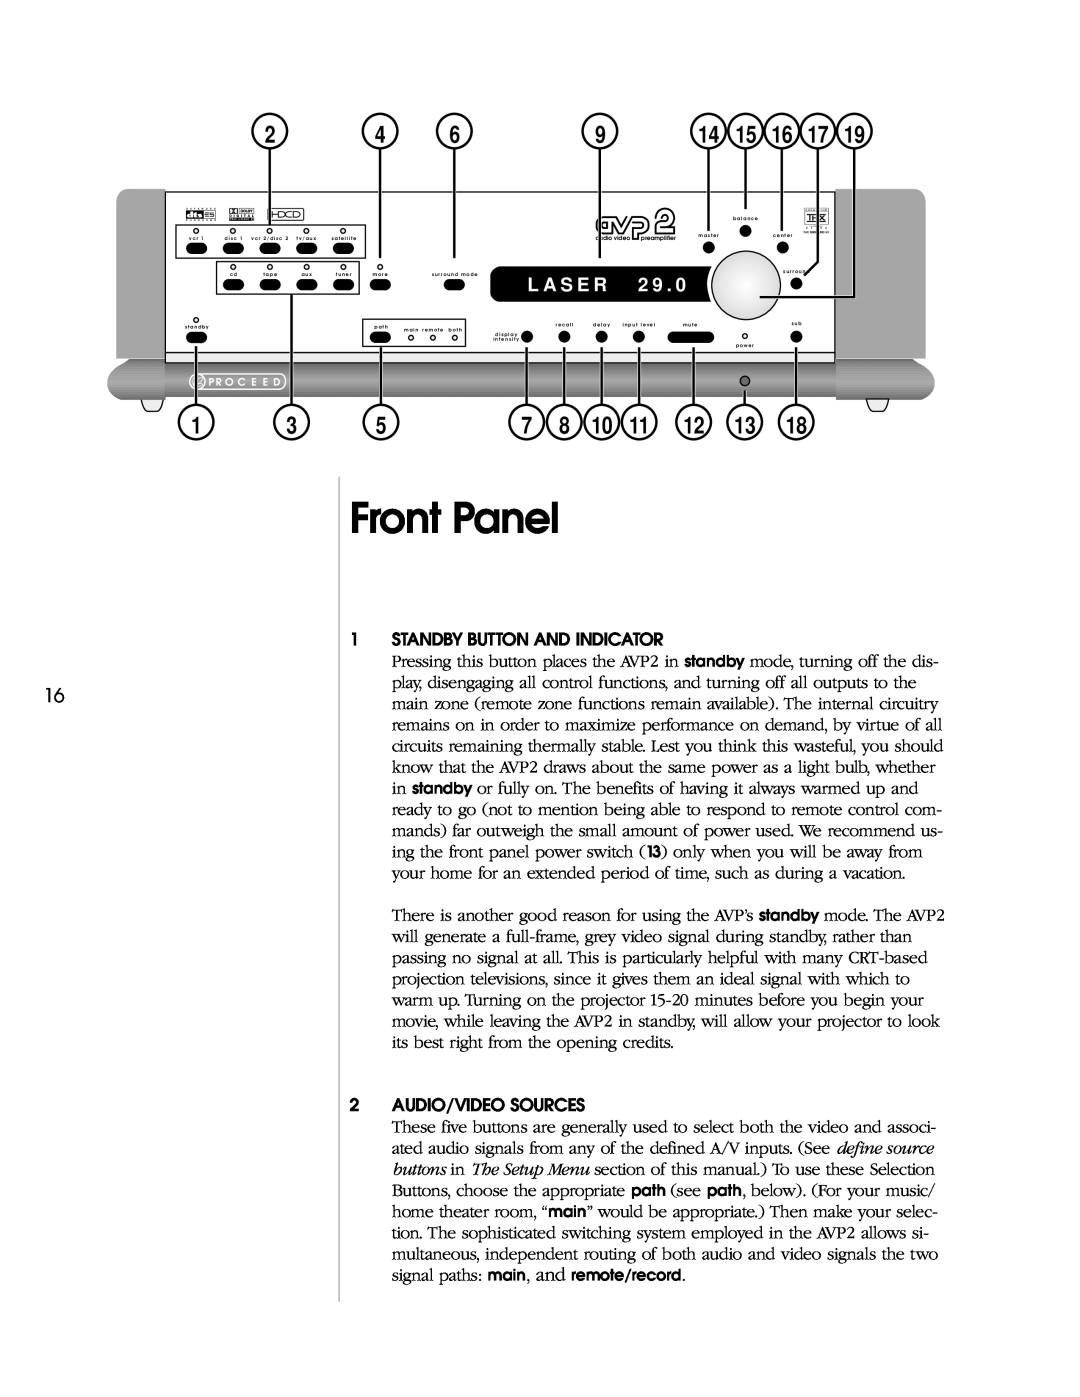 Madrigal Imaging AVP2 owner manual Front Panel, L A S E R 